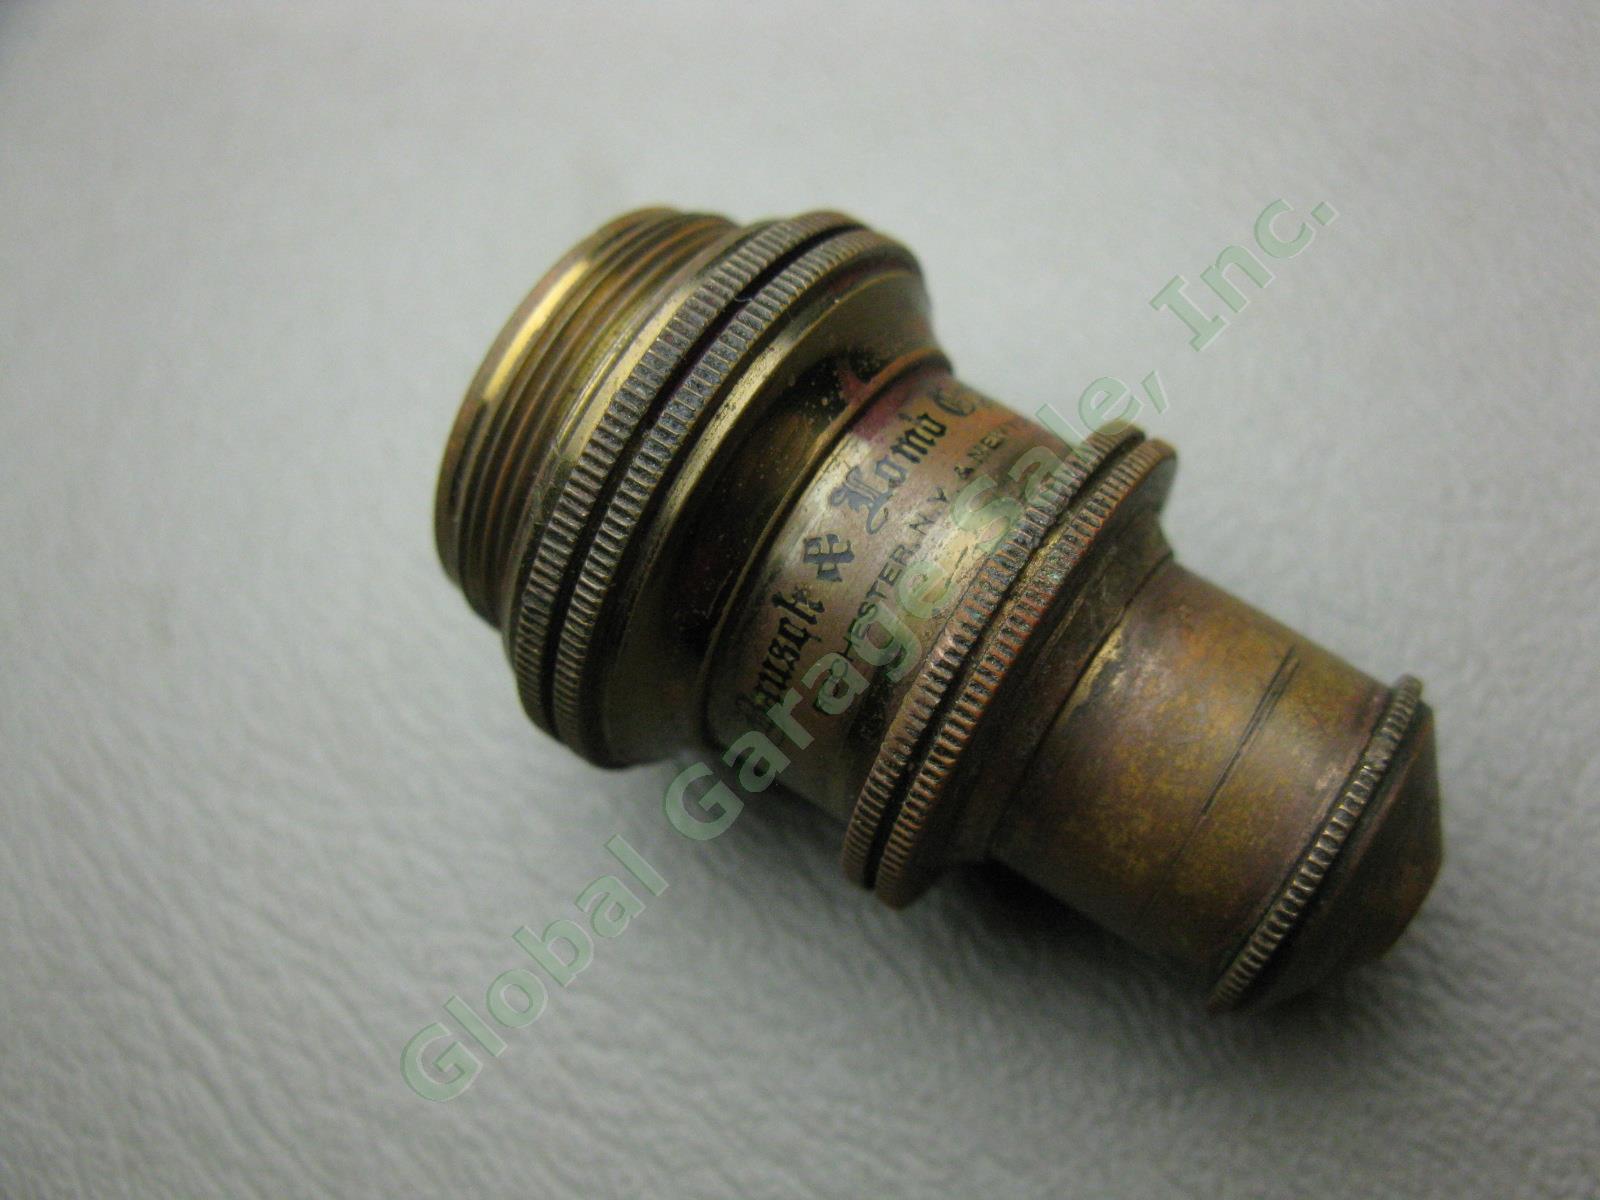 Vtg Antique 1896 Brass Bausch & Lomb Microscope 22434 Series I 1/6 .82 Objective 7